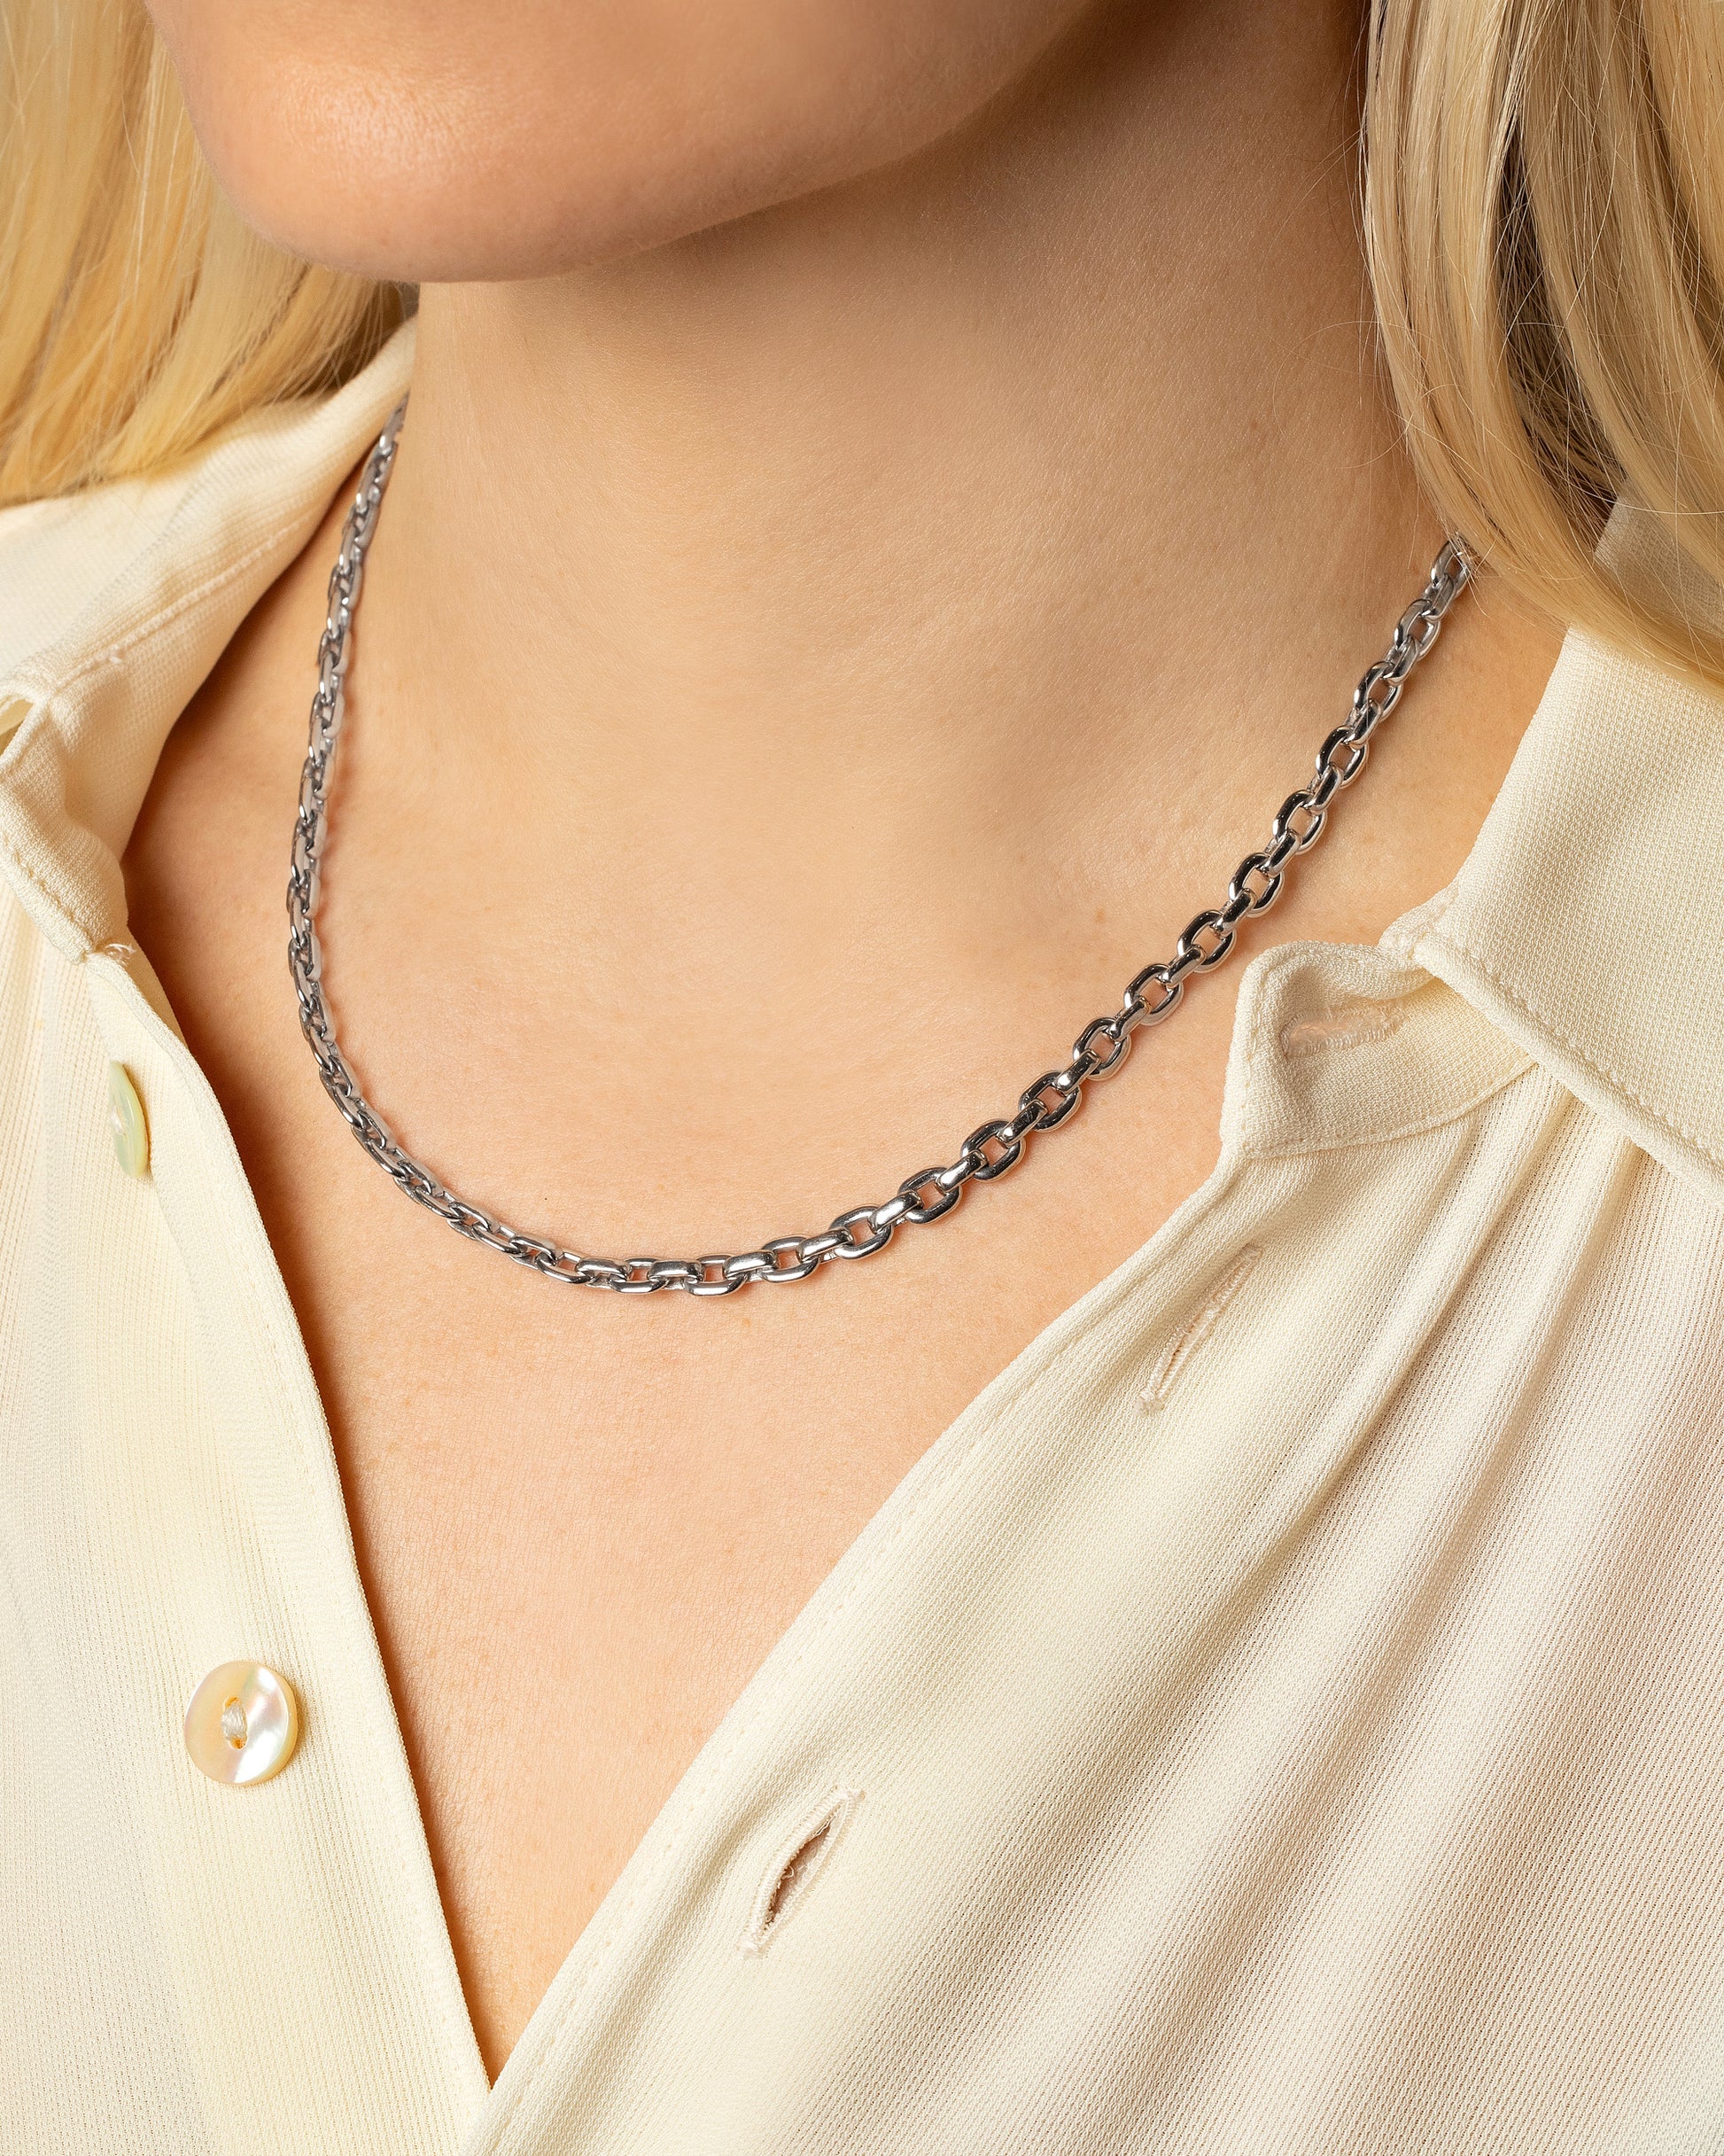 Cartier Oval Cable Chain Necklace on model.